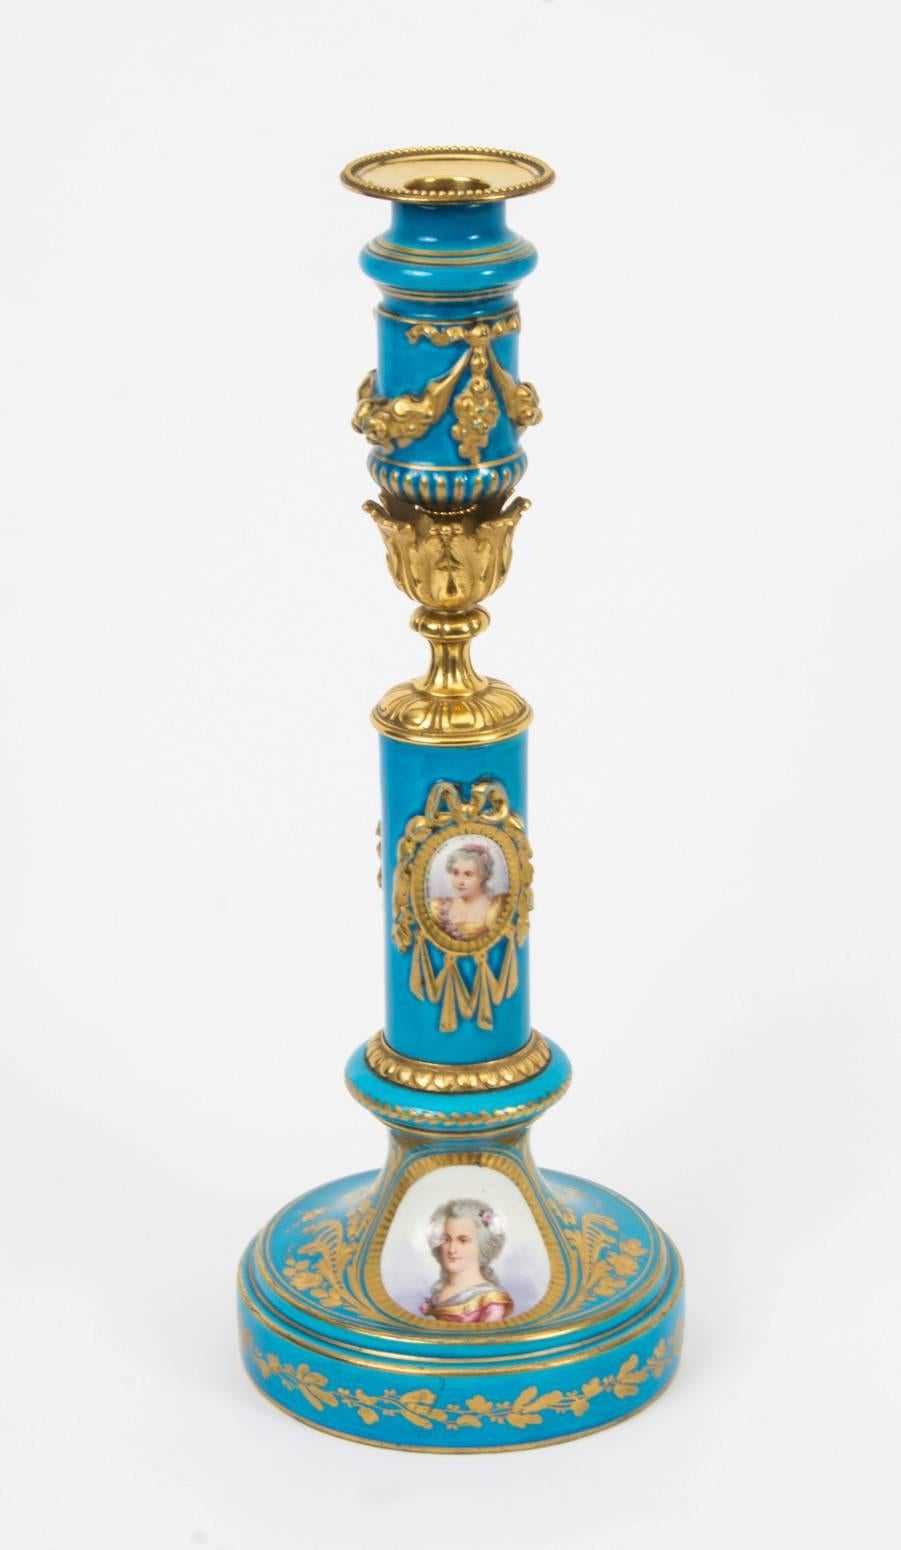 Late 19th Century Antique Pair of Sevres Porcelain and Ormolu Candlesticks, circa 1880